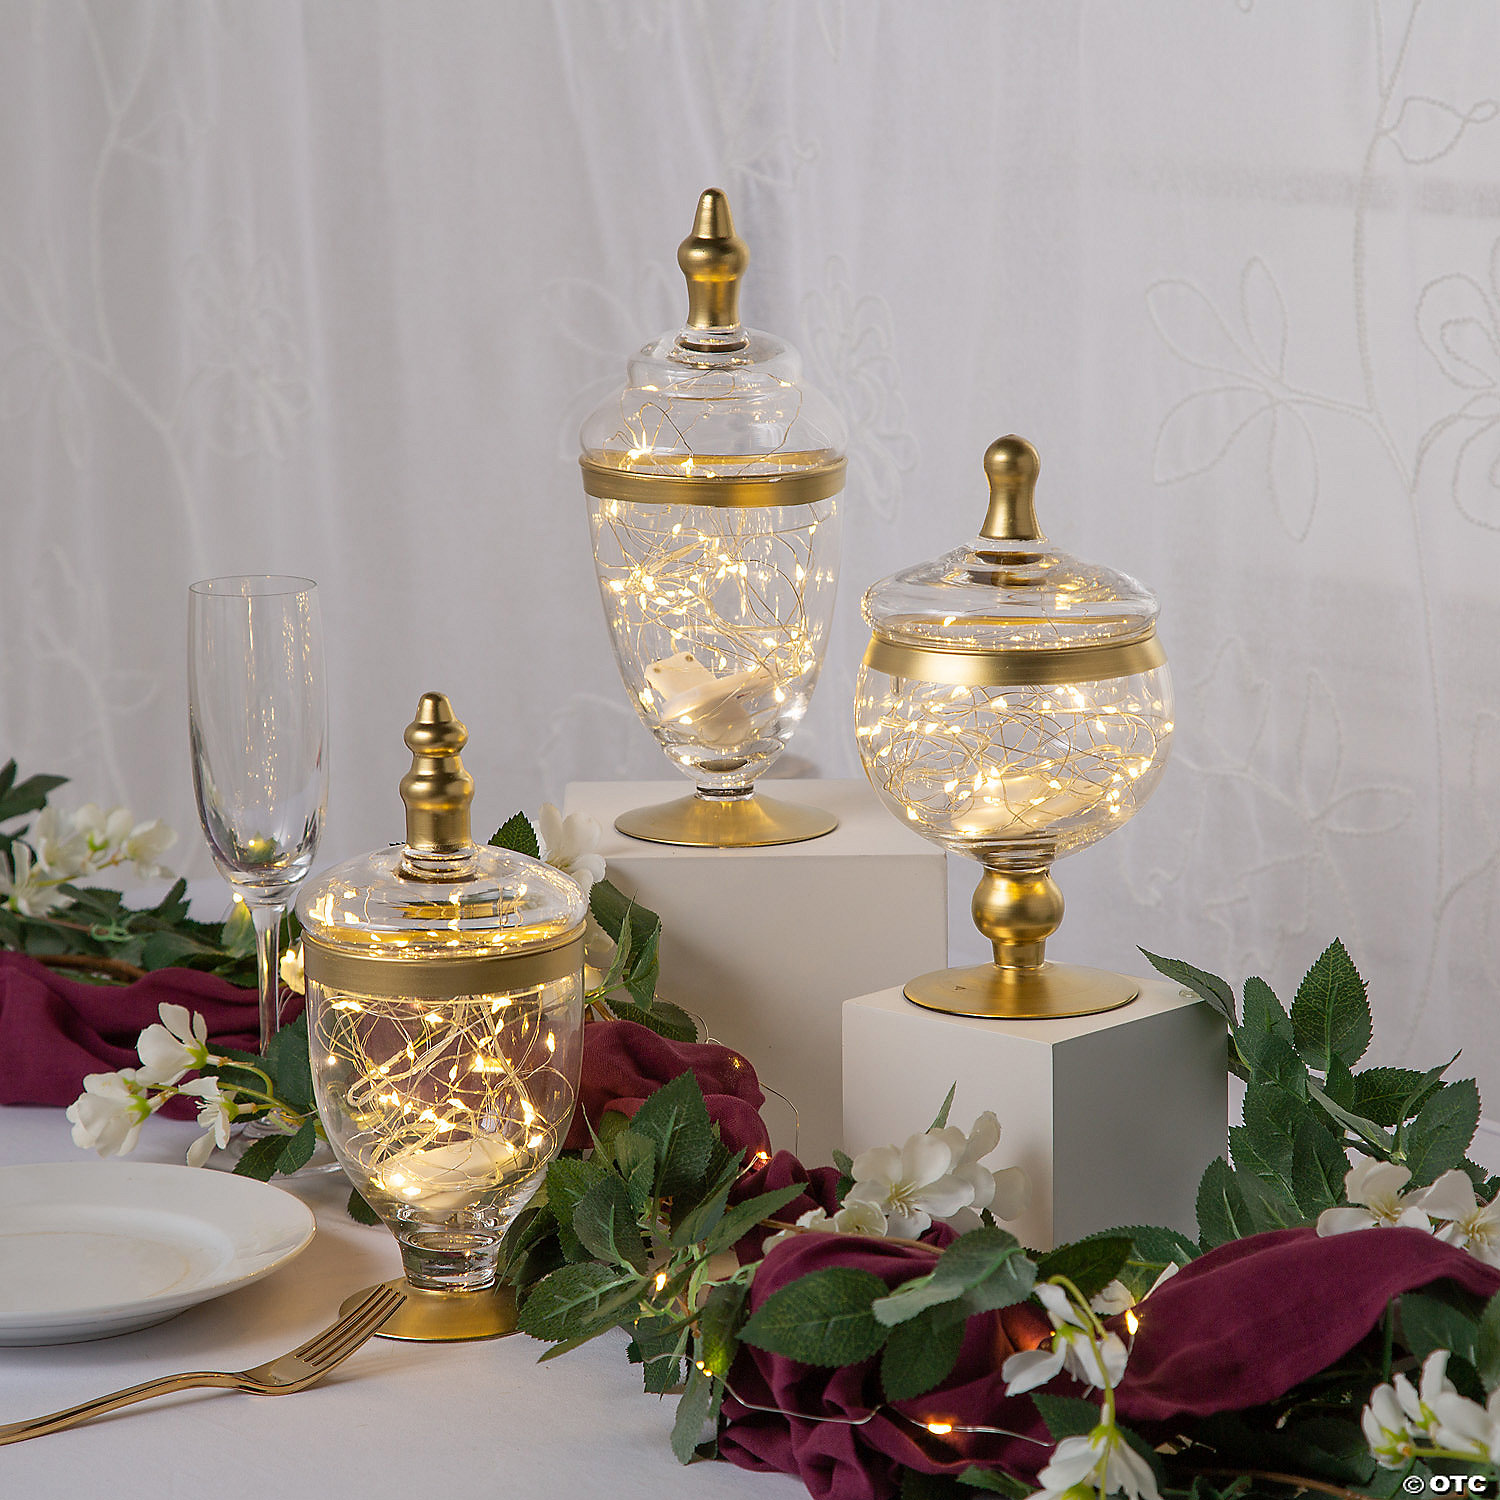 B012: Decoration LED Lights Gold Trim Apothecary Jars with LED Lights Rose Morning